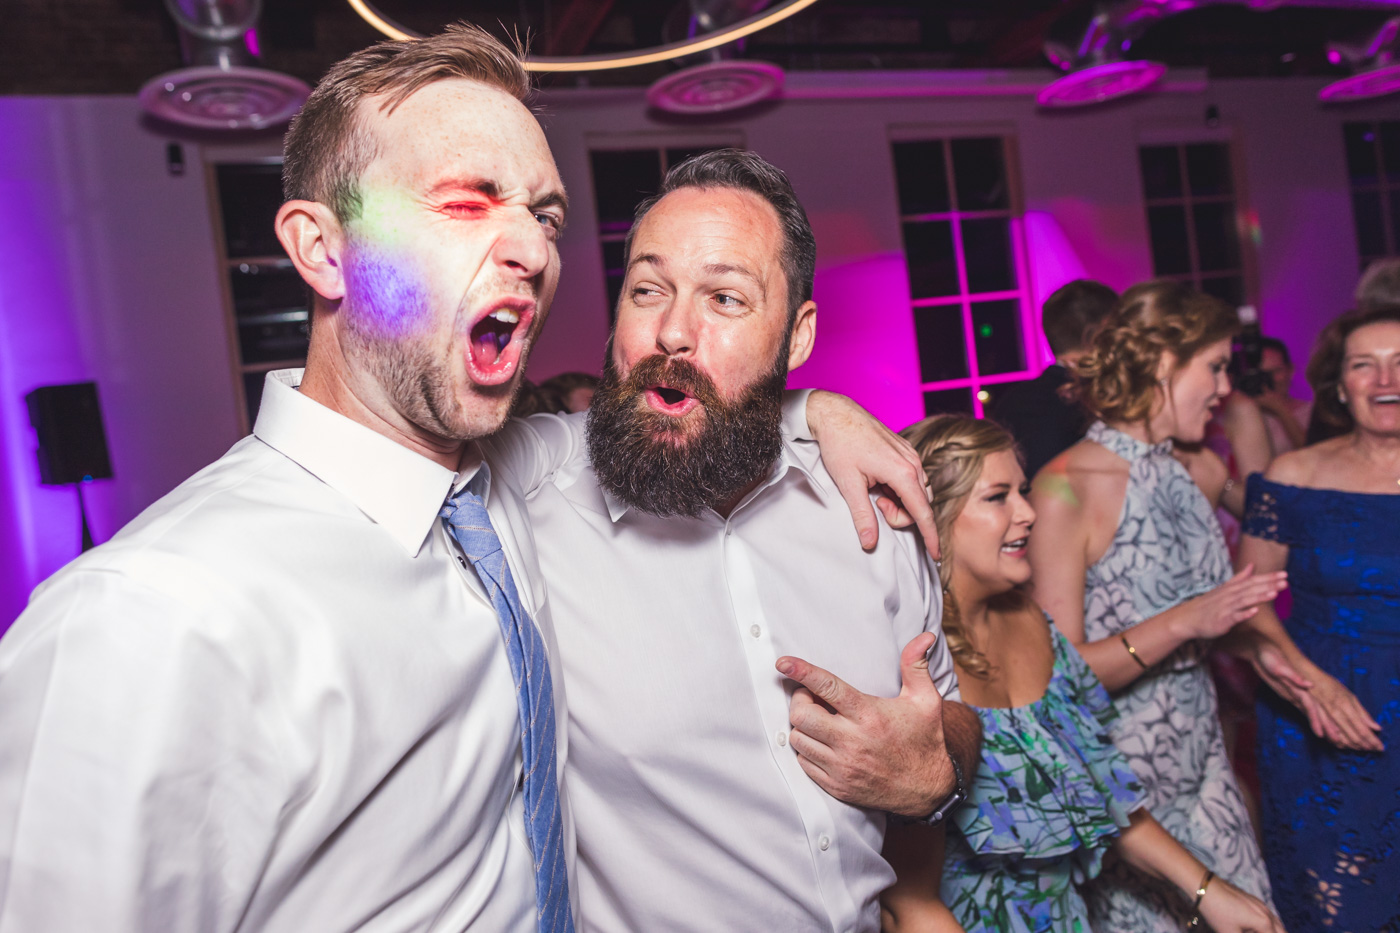 groomsmen-being-silly-at-reception